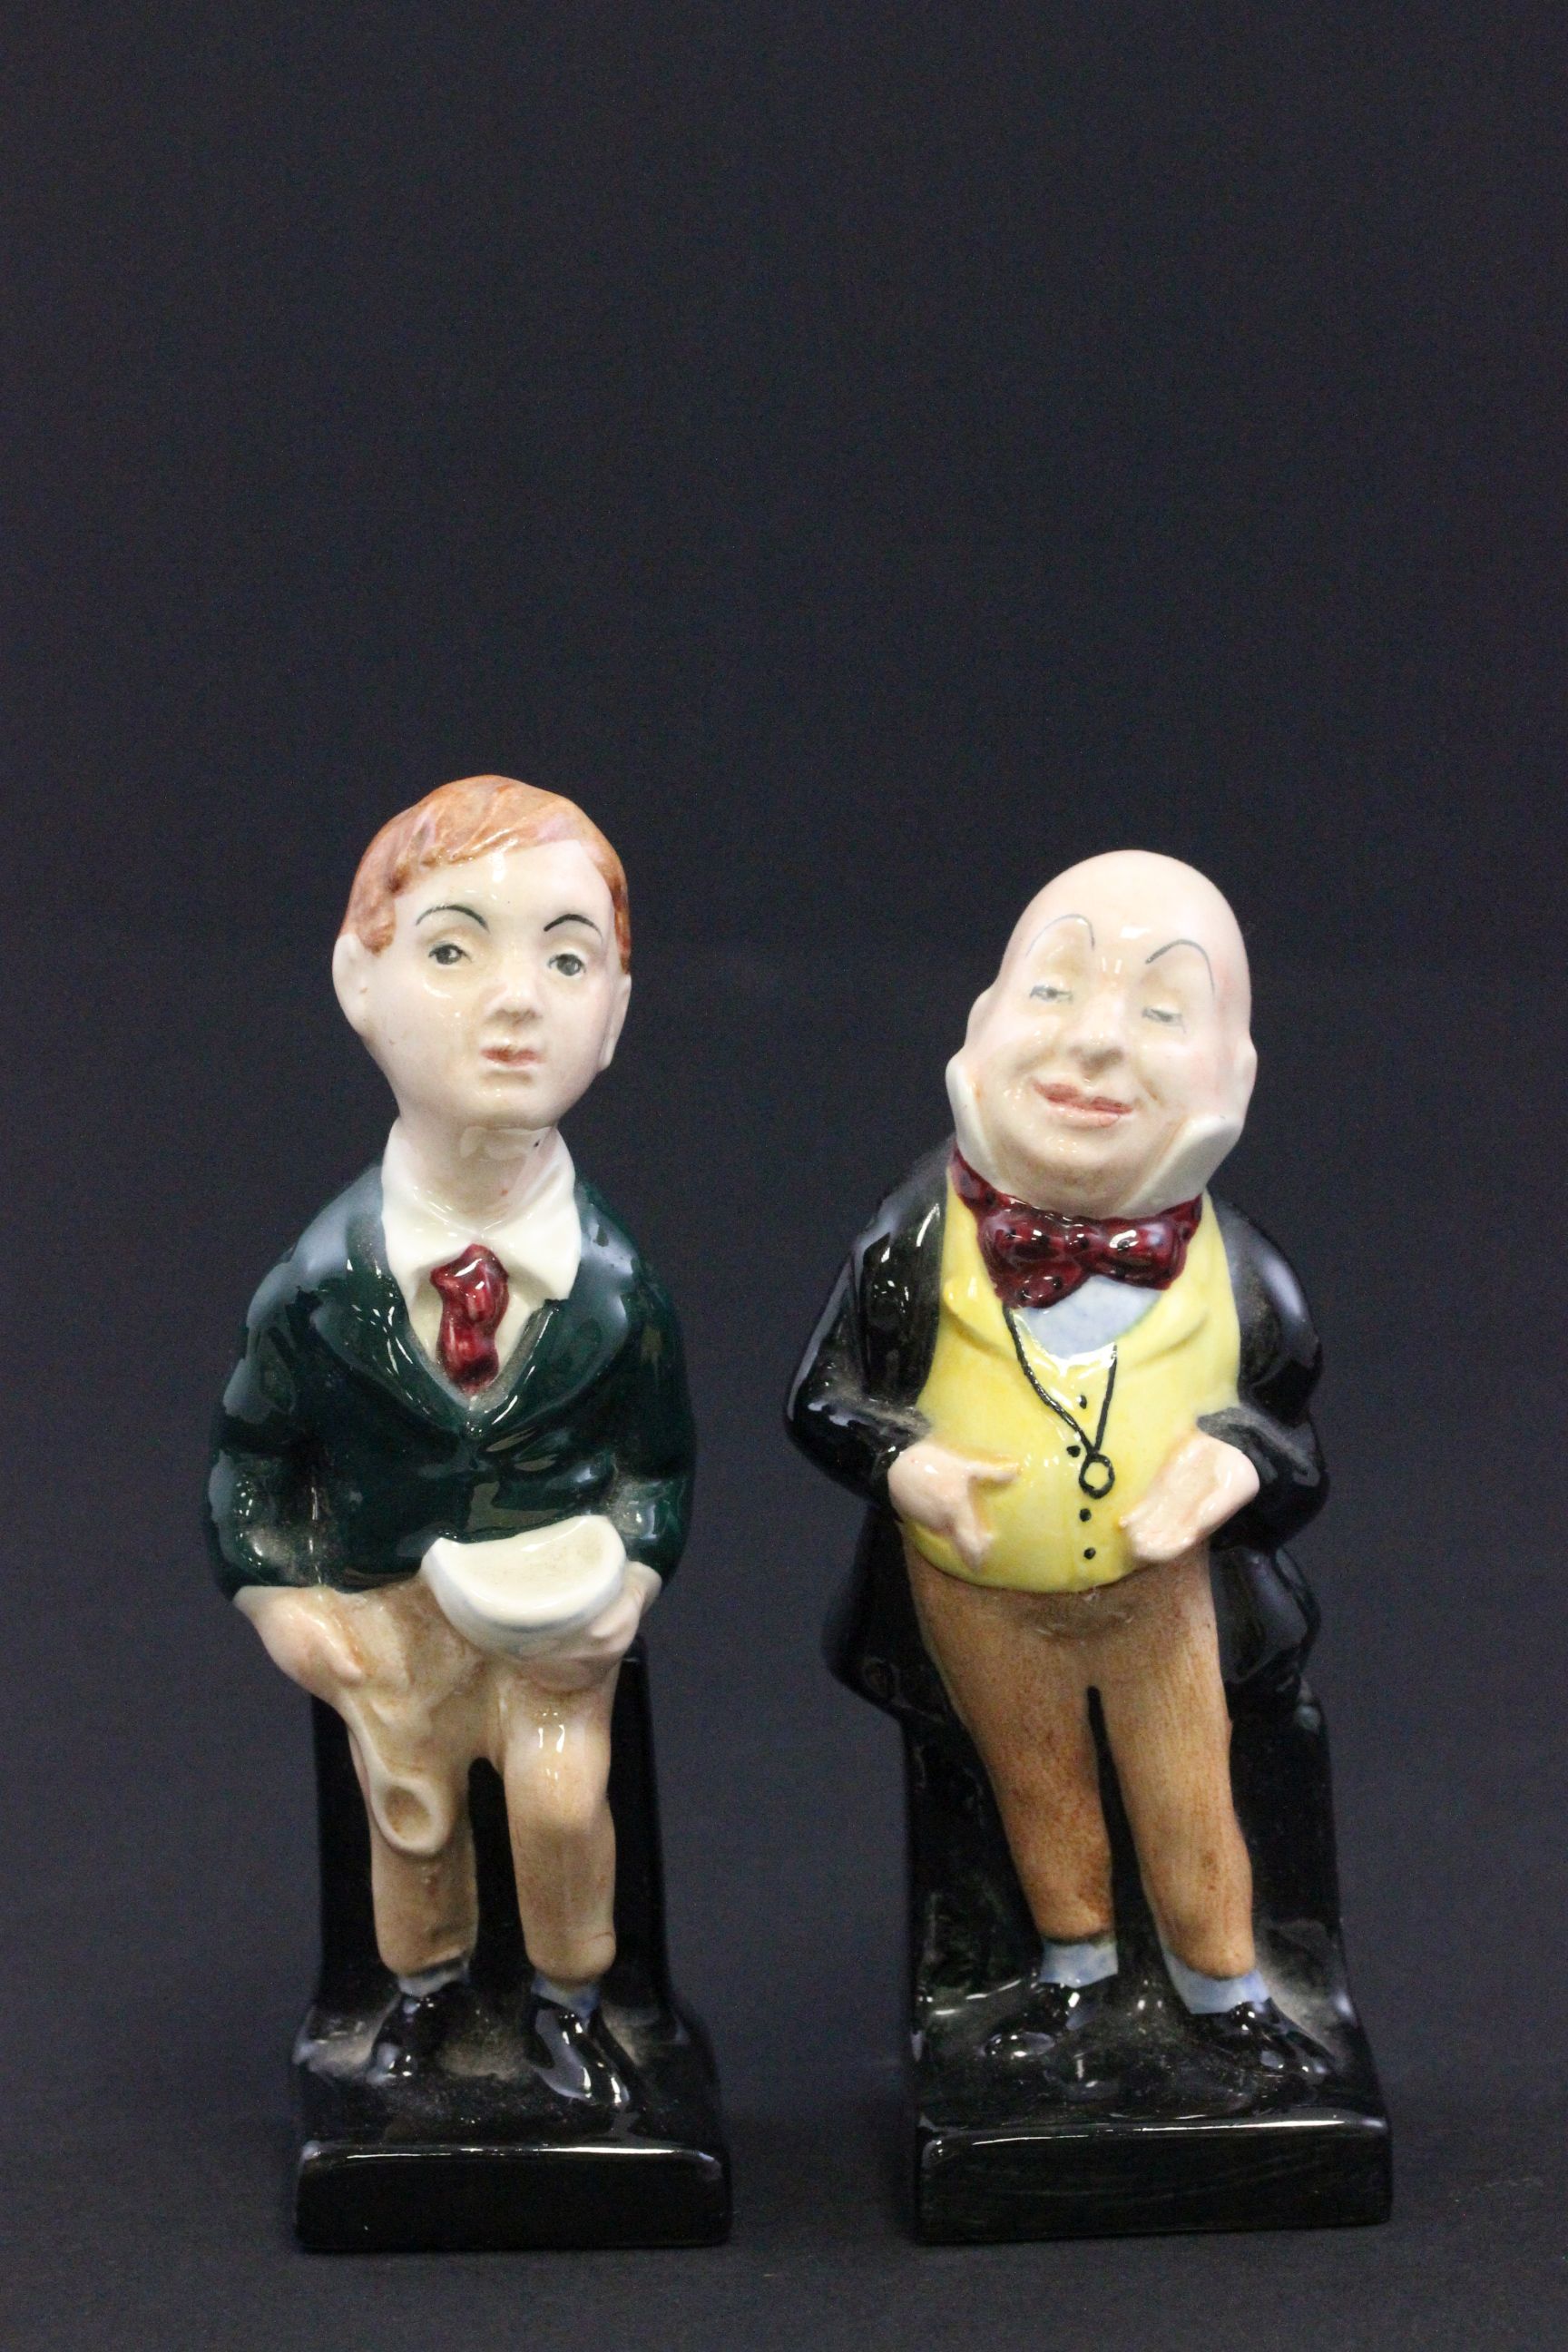 Pair of Royal Doulton Charles Dickens figurines Oliver Twist & Micawber